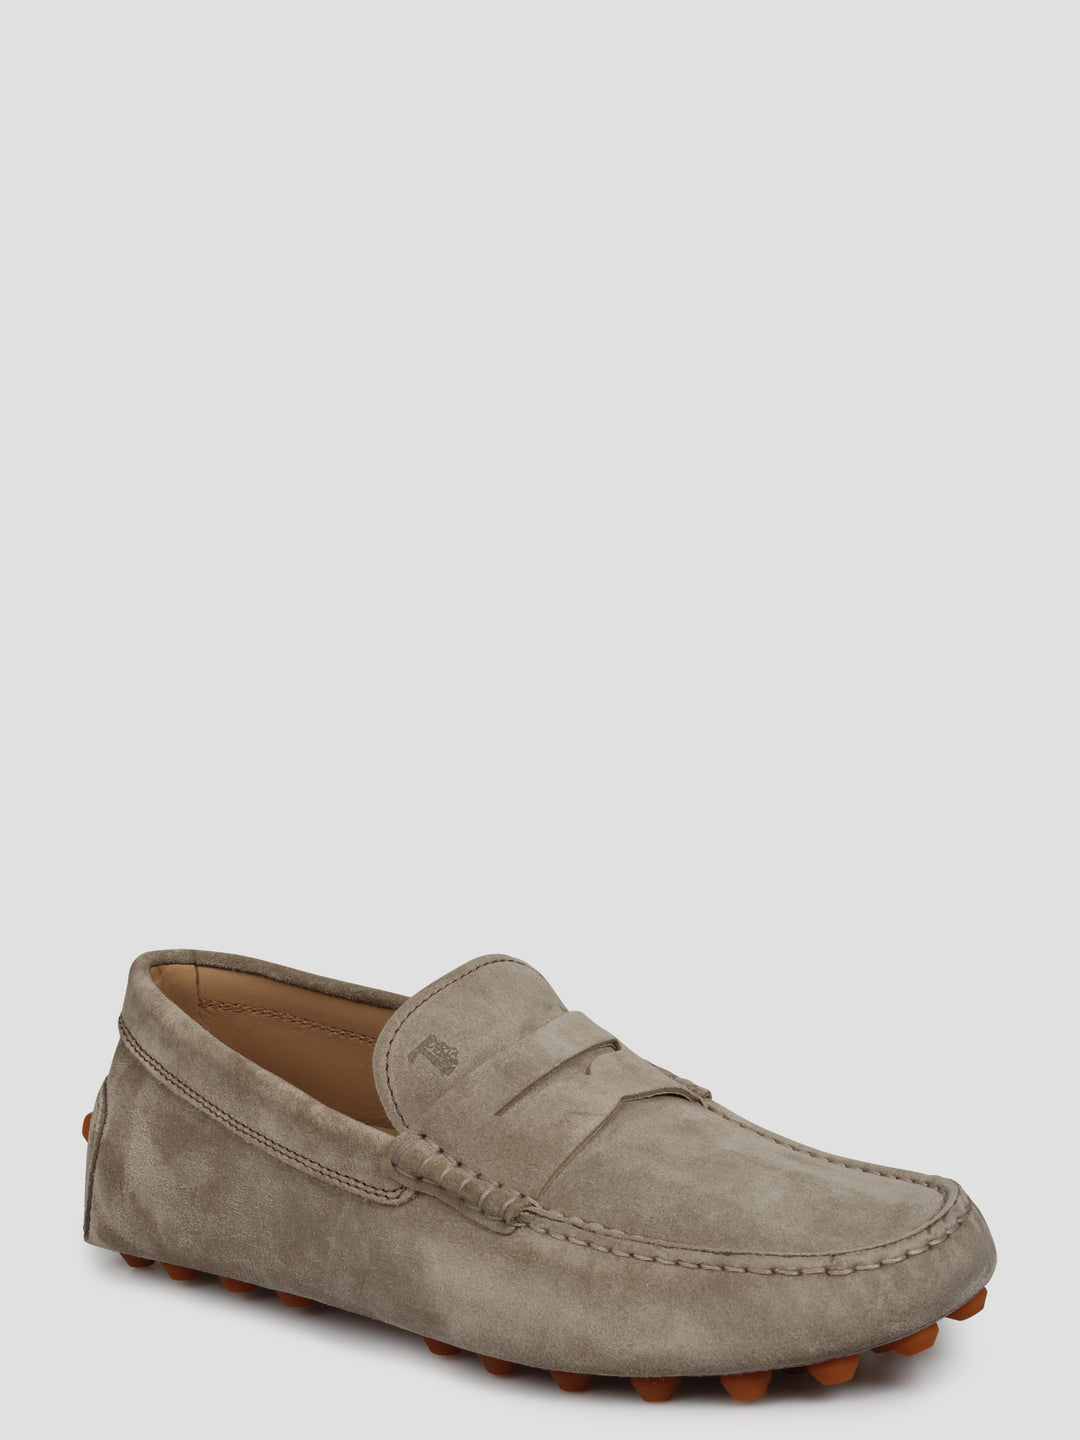 Suede gommino bubble loafers